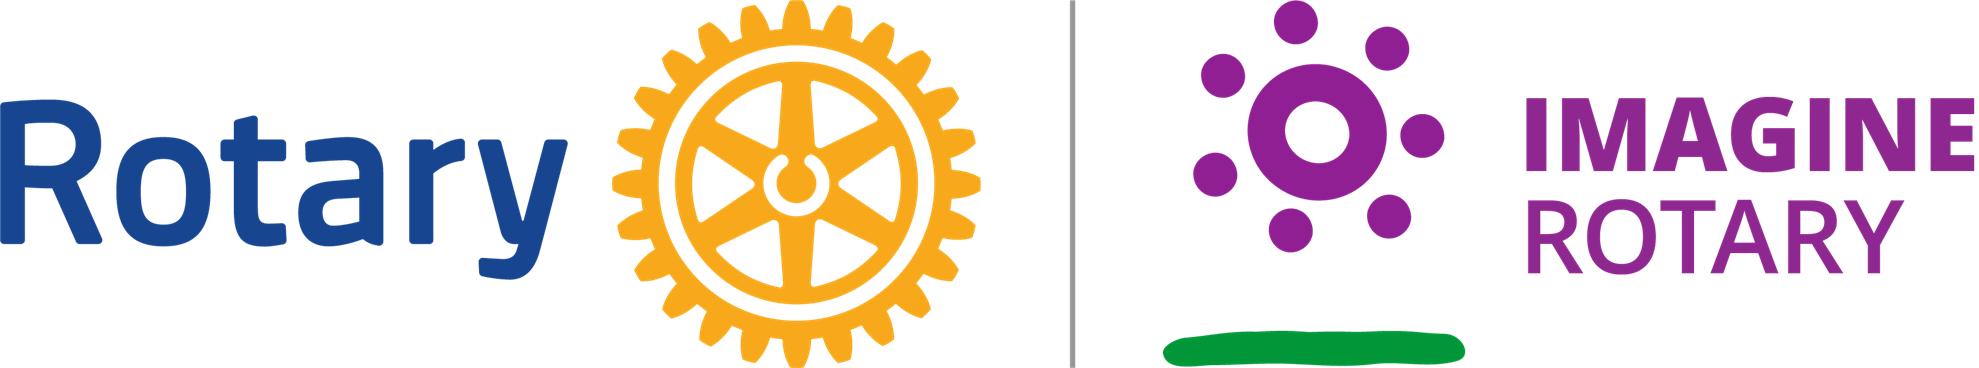 Download Rotary Club Logo Clip Art - Rotary Club PNG Image with No  Background - PNGkey.com